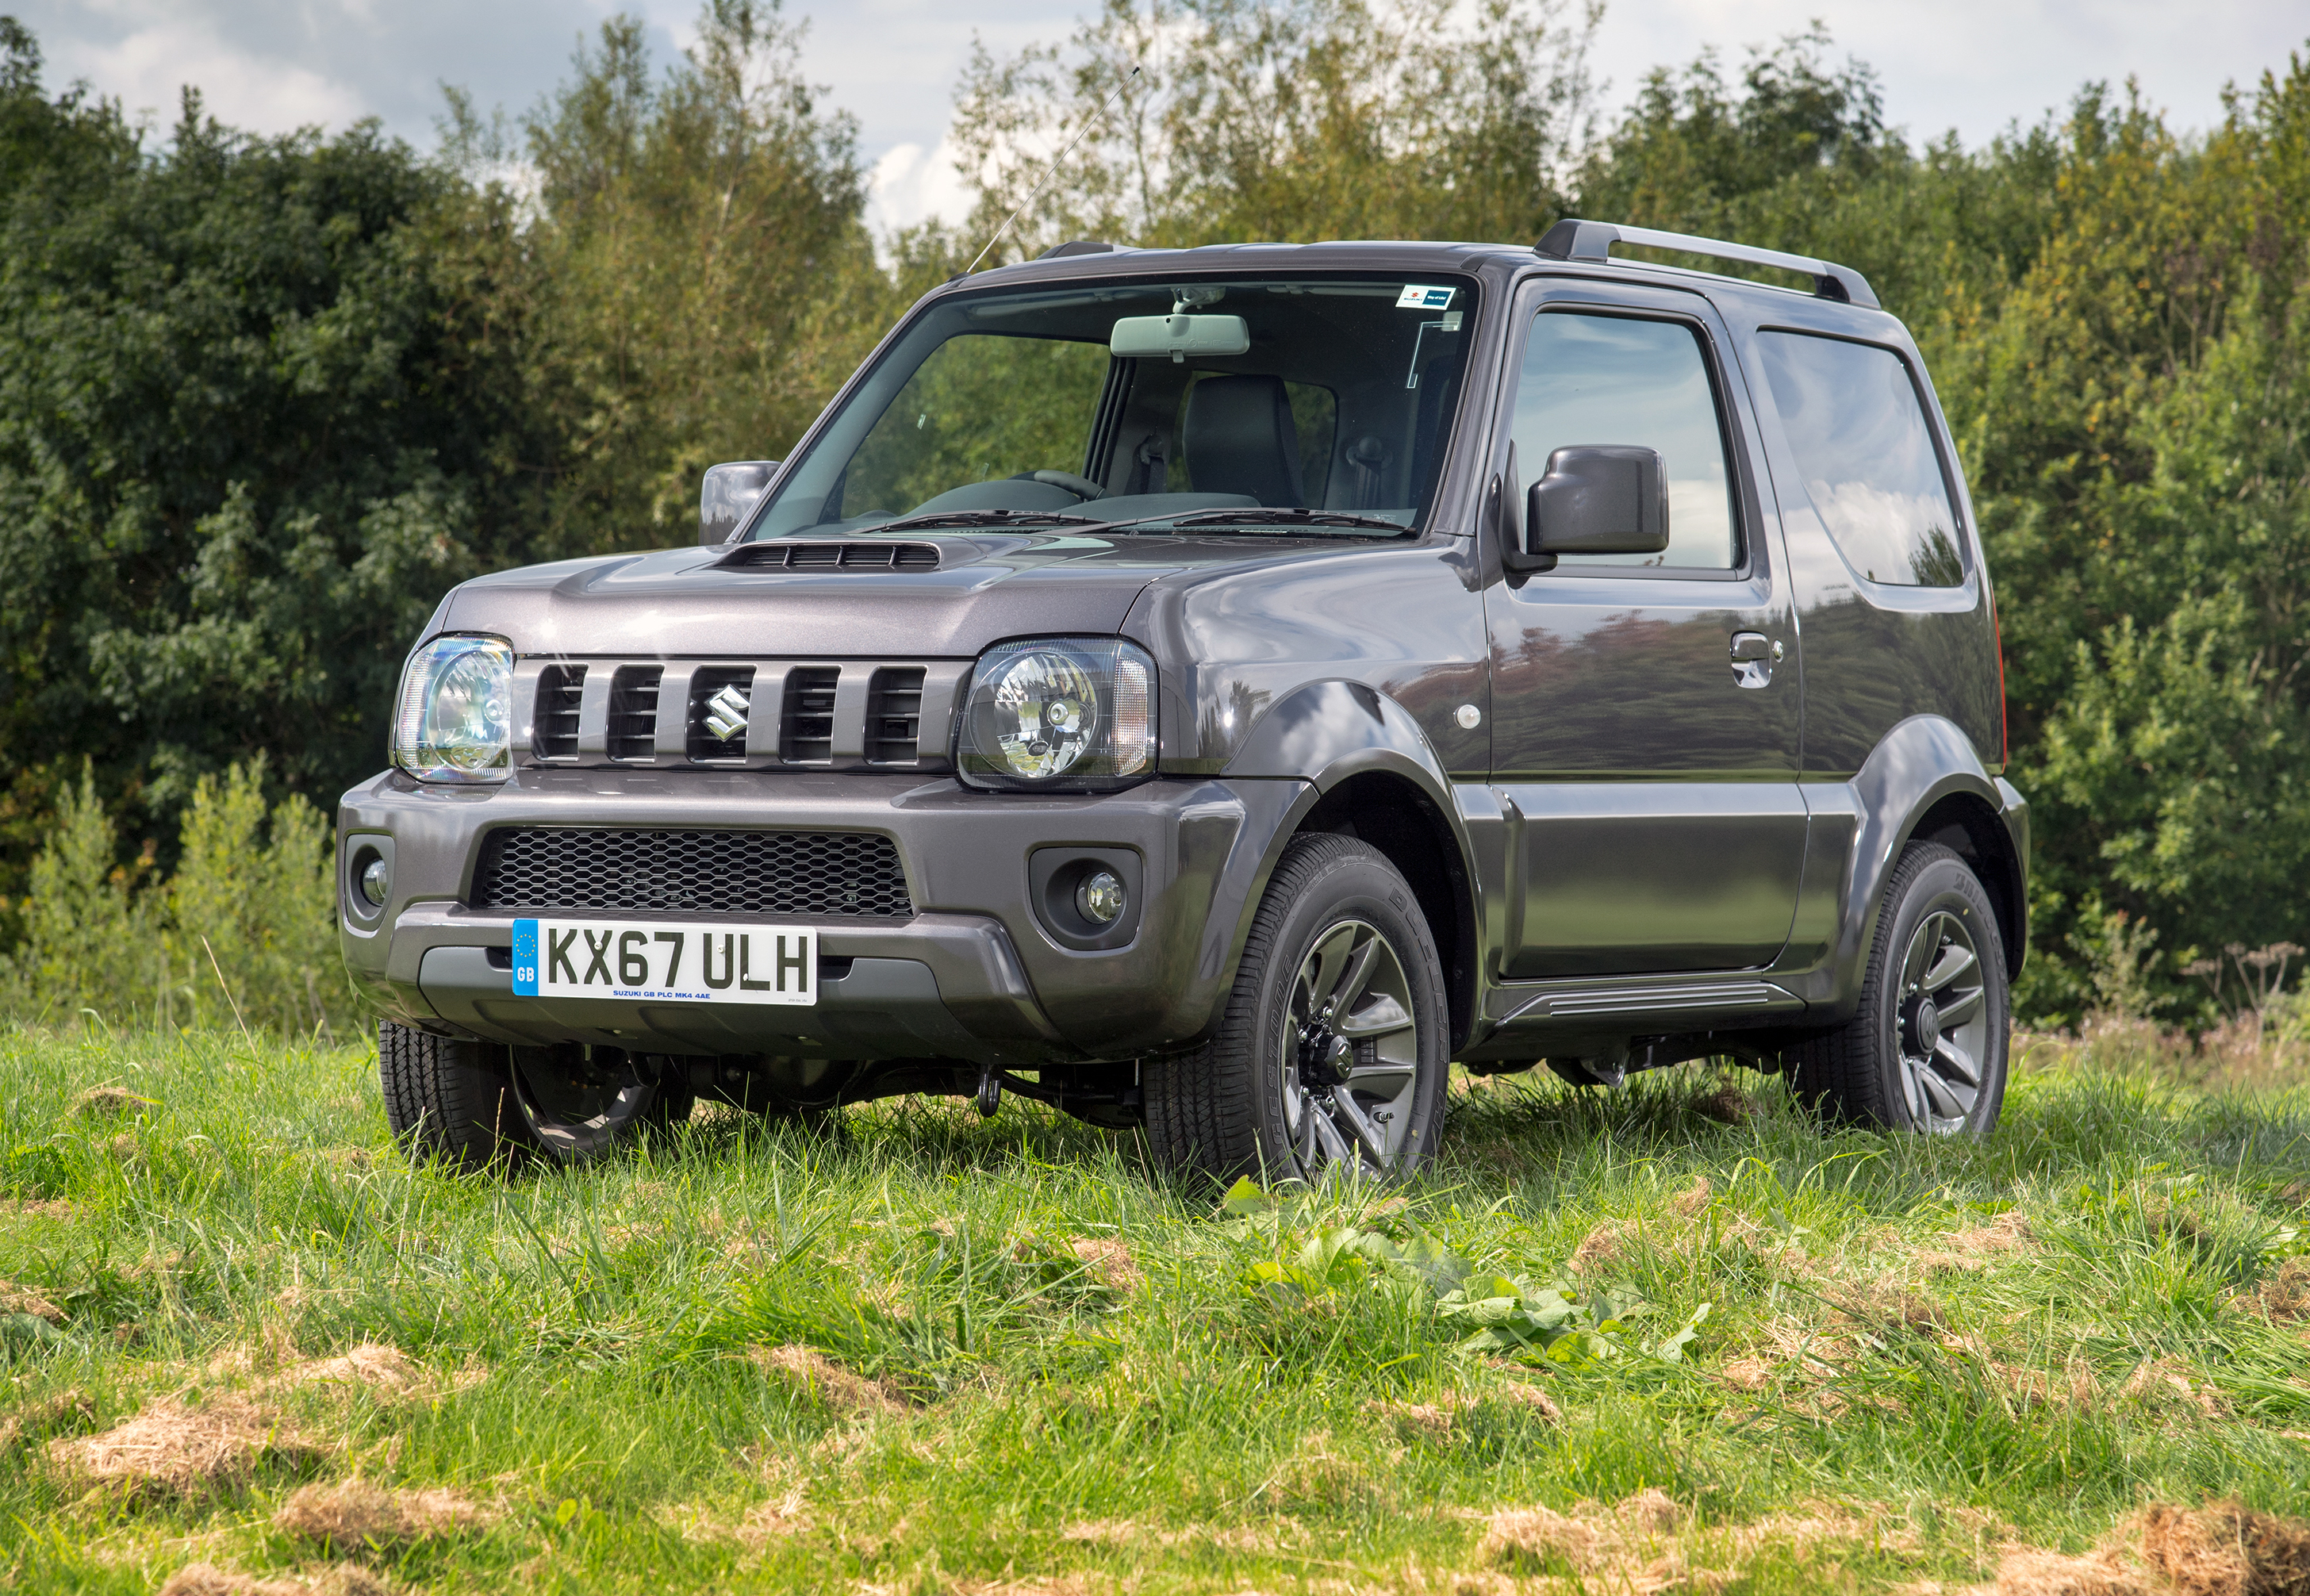 The Jimny remains one of the best off-roaders available